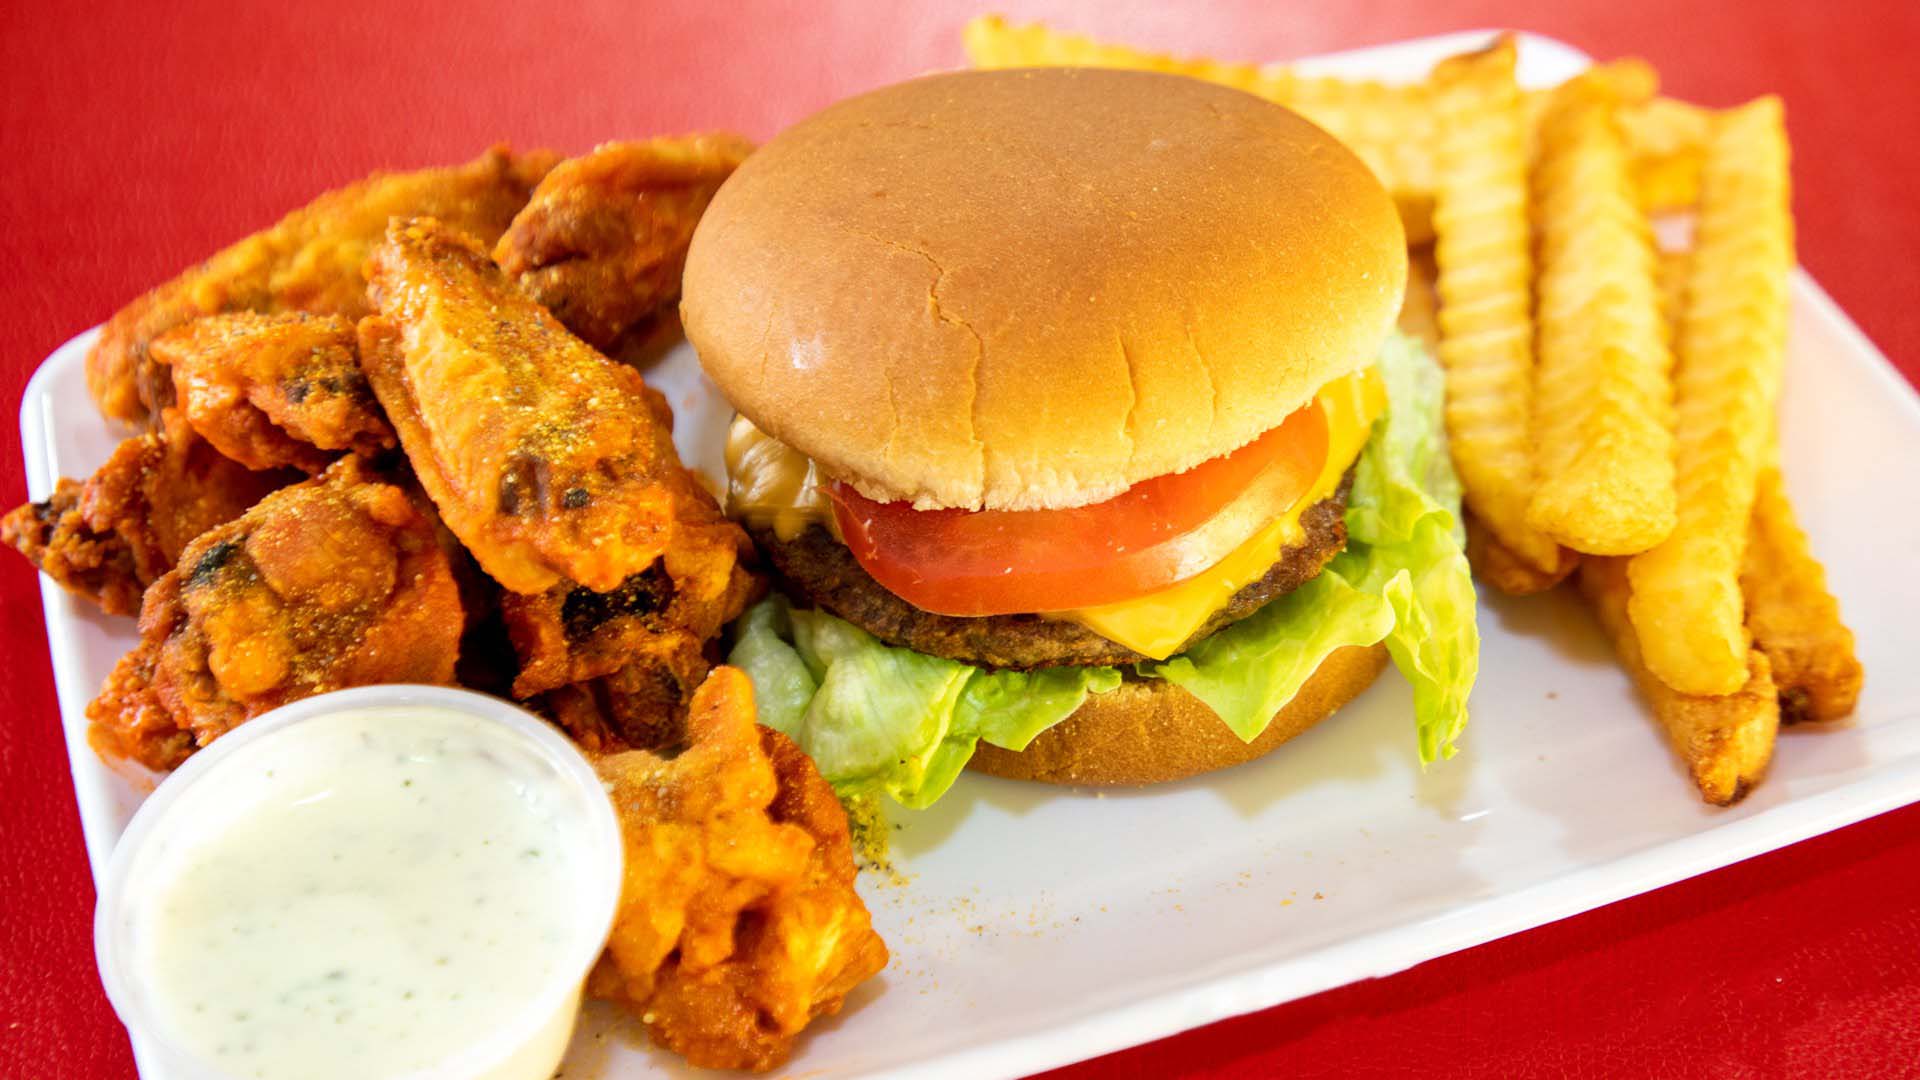 A plate of fast food including a burger, fried chicken wings, crinkle-cut fries, and a side of dip.